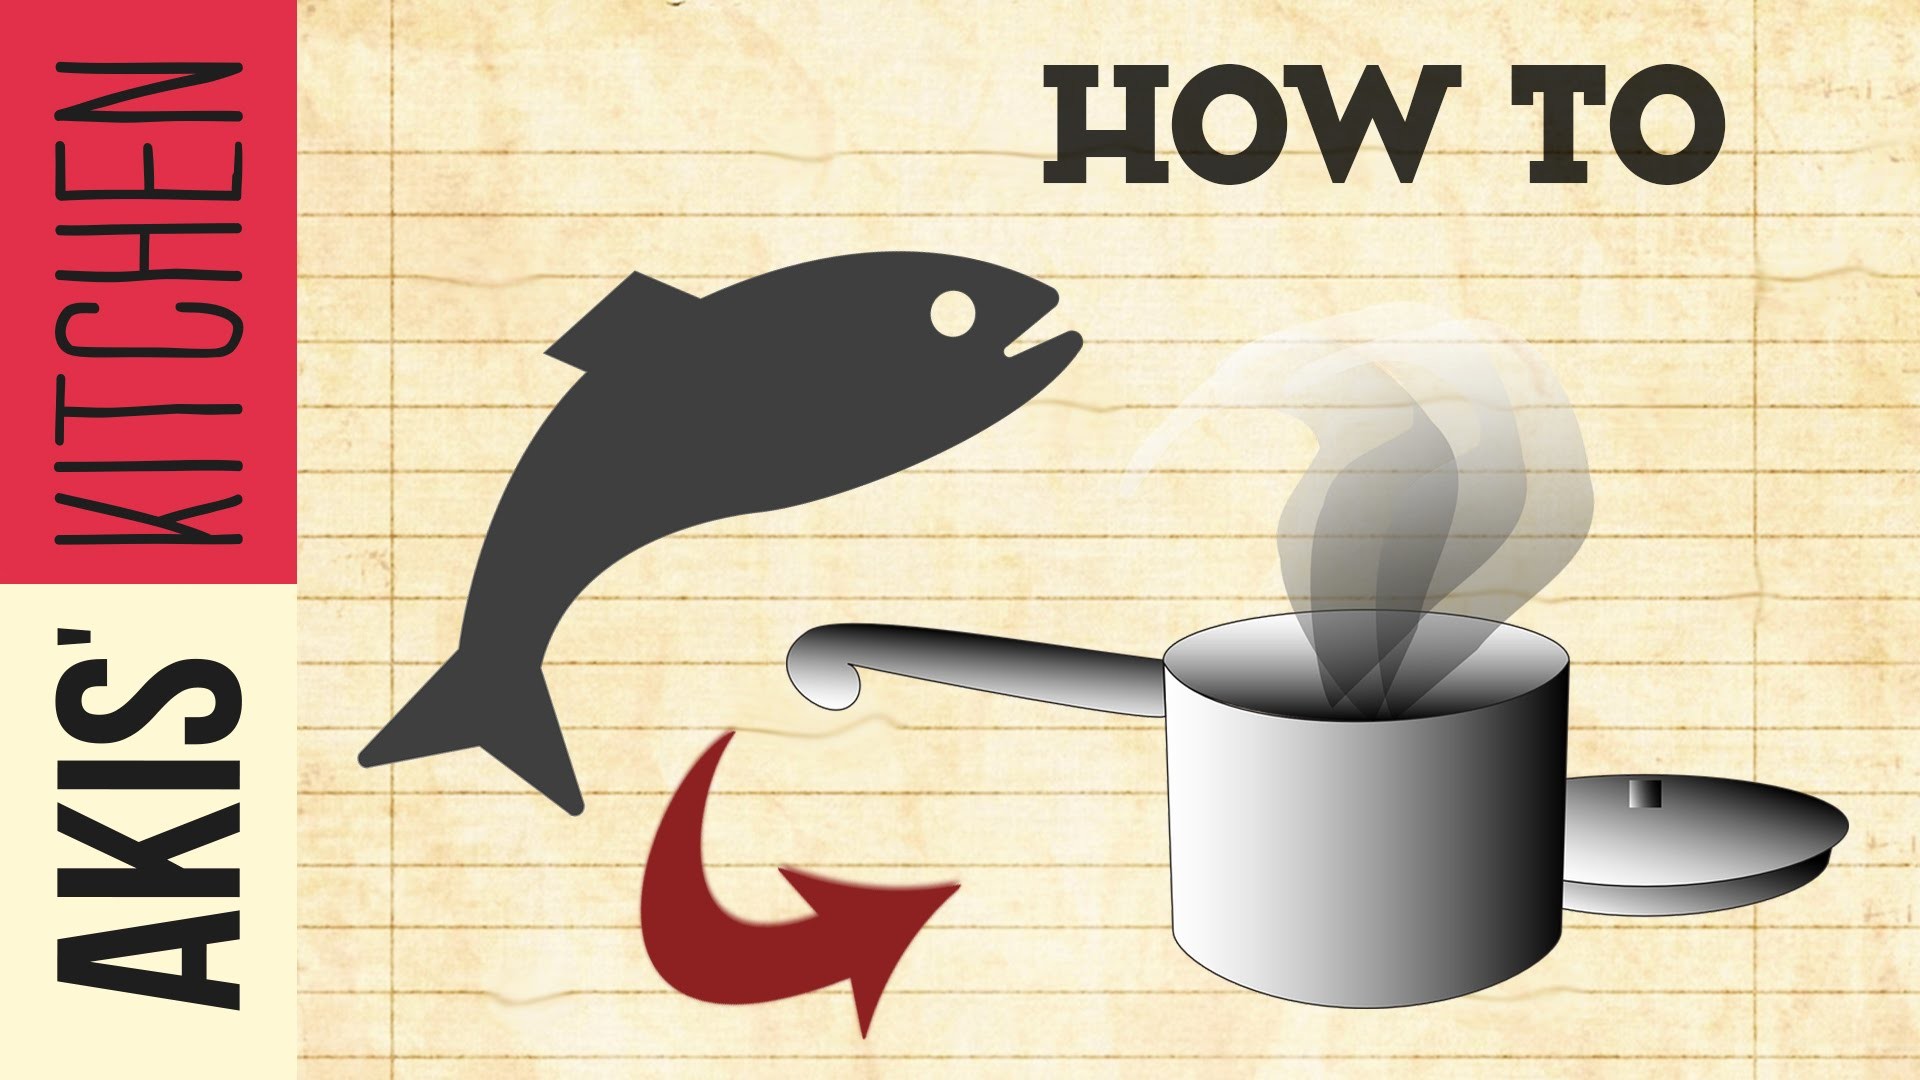 How to steam fish фото 2